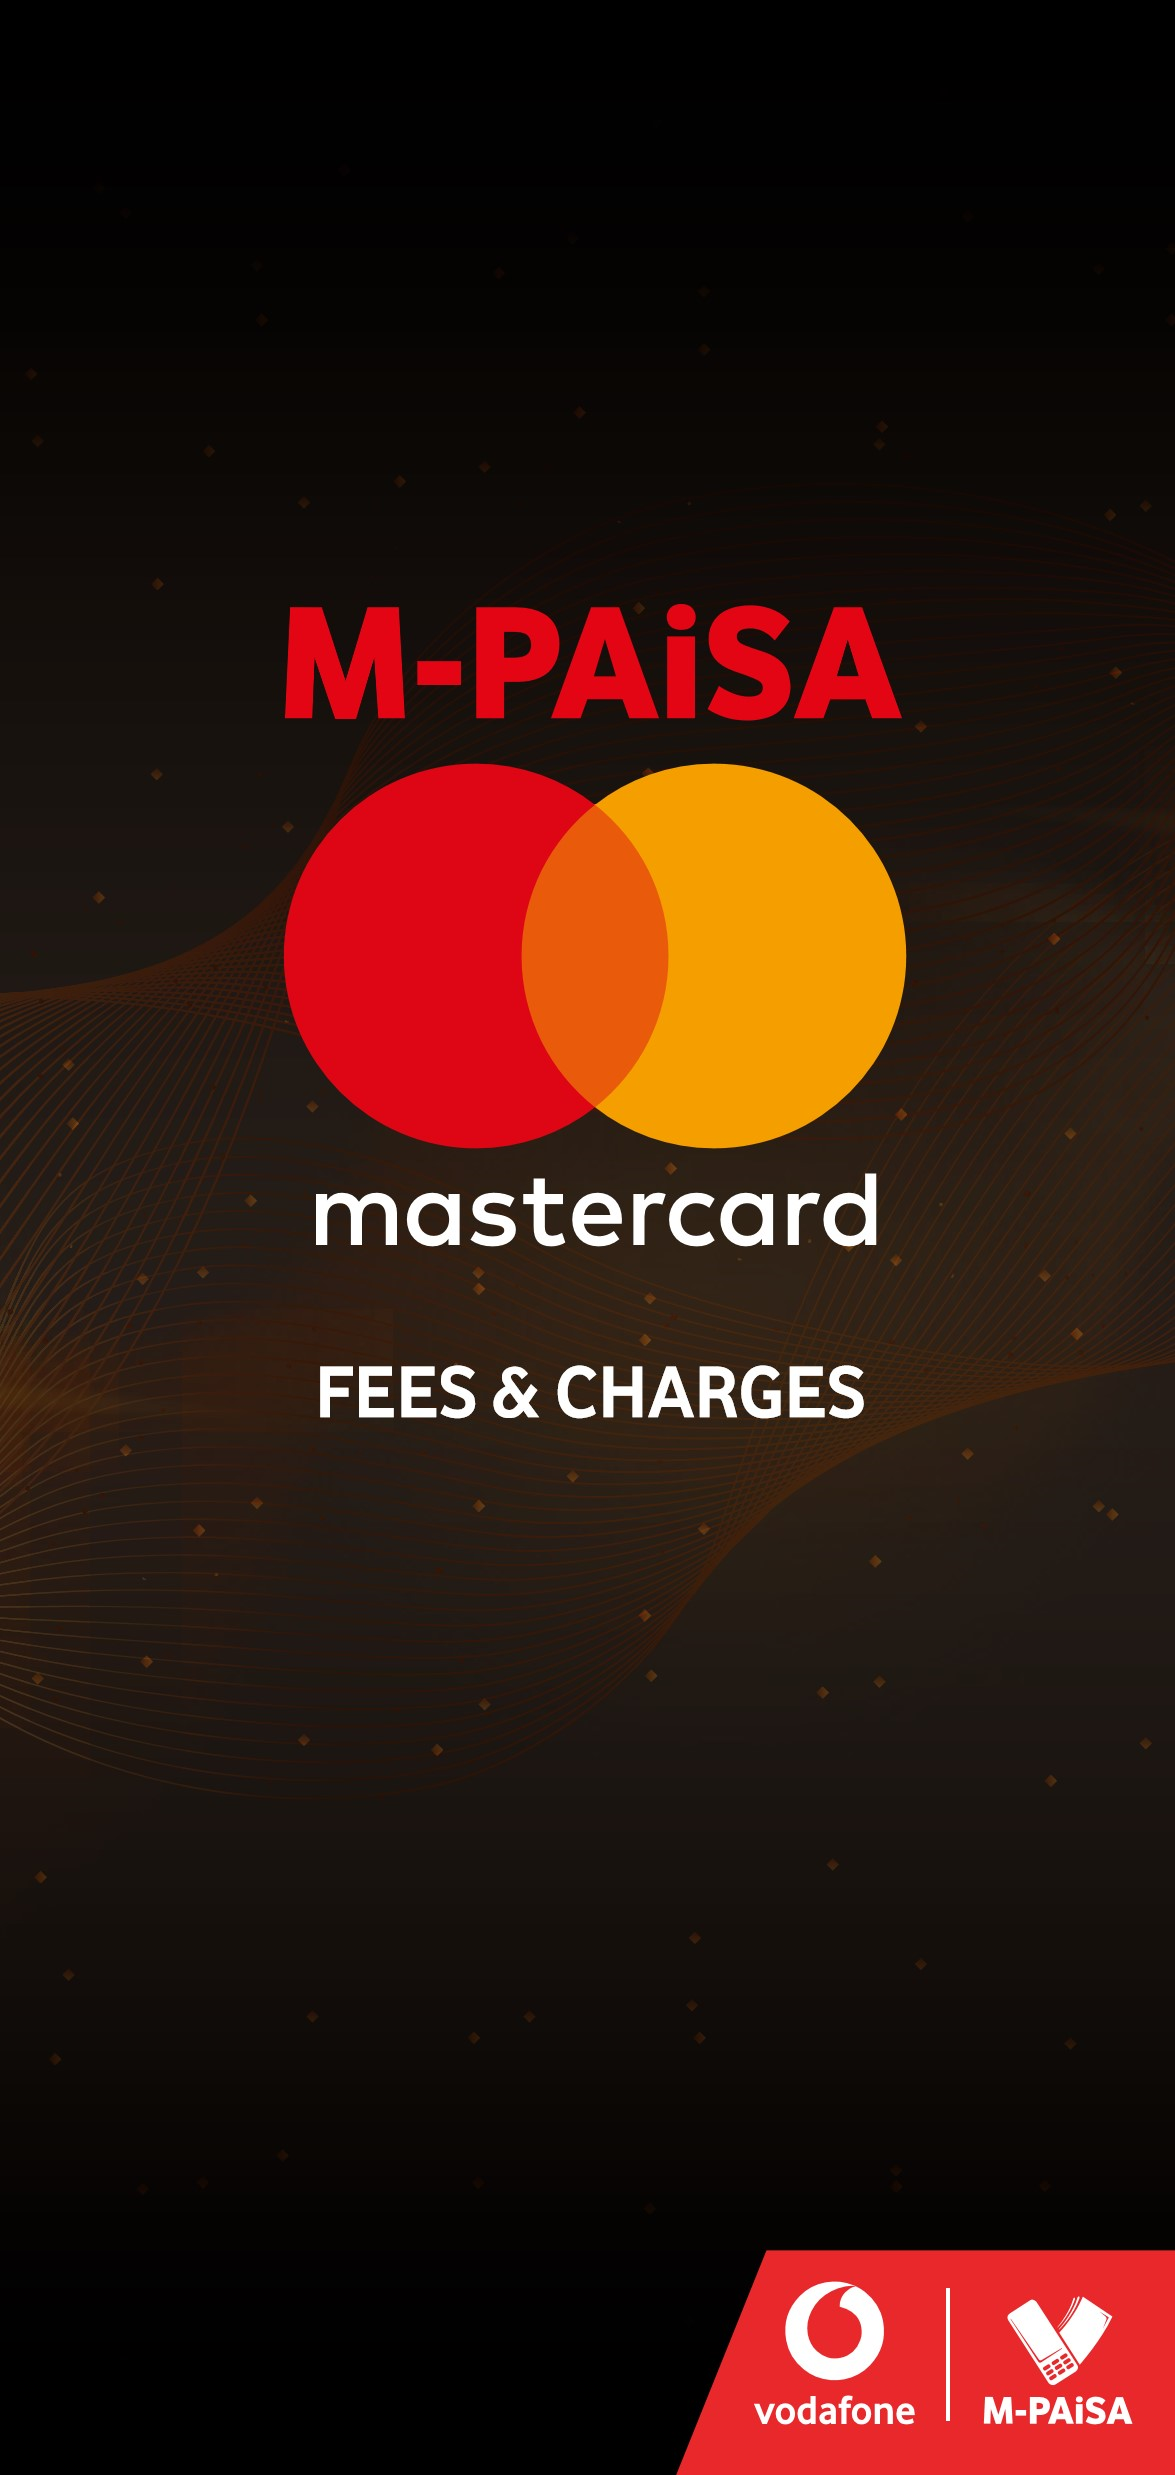 Mastercard fees & Charges v1